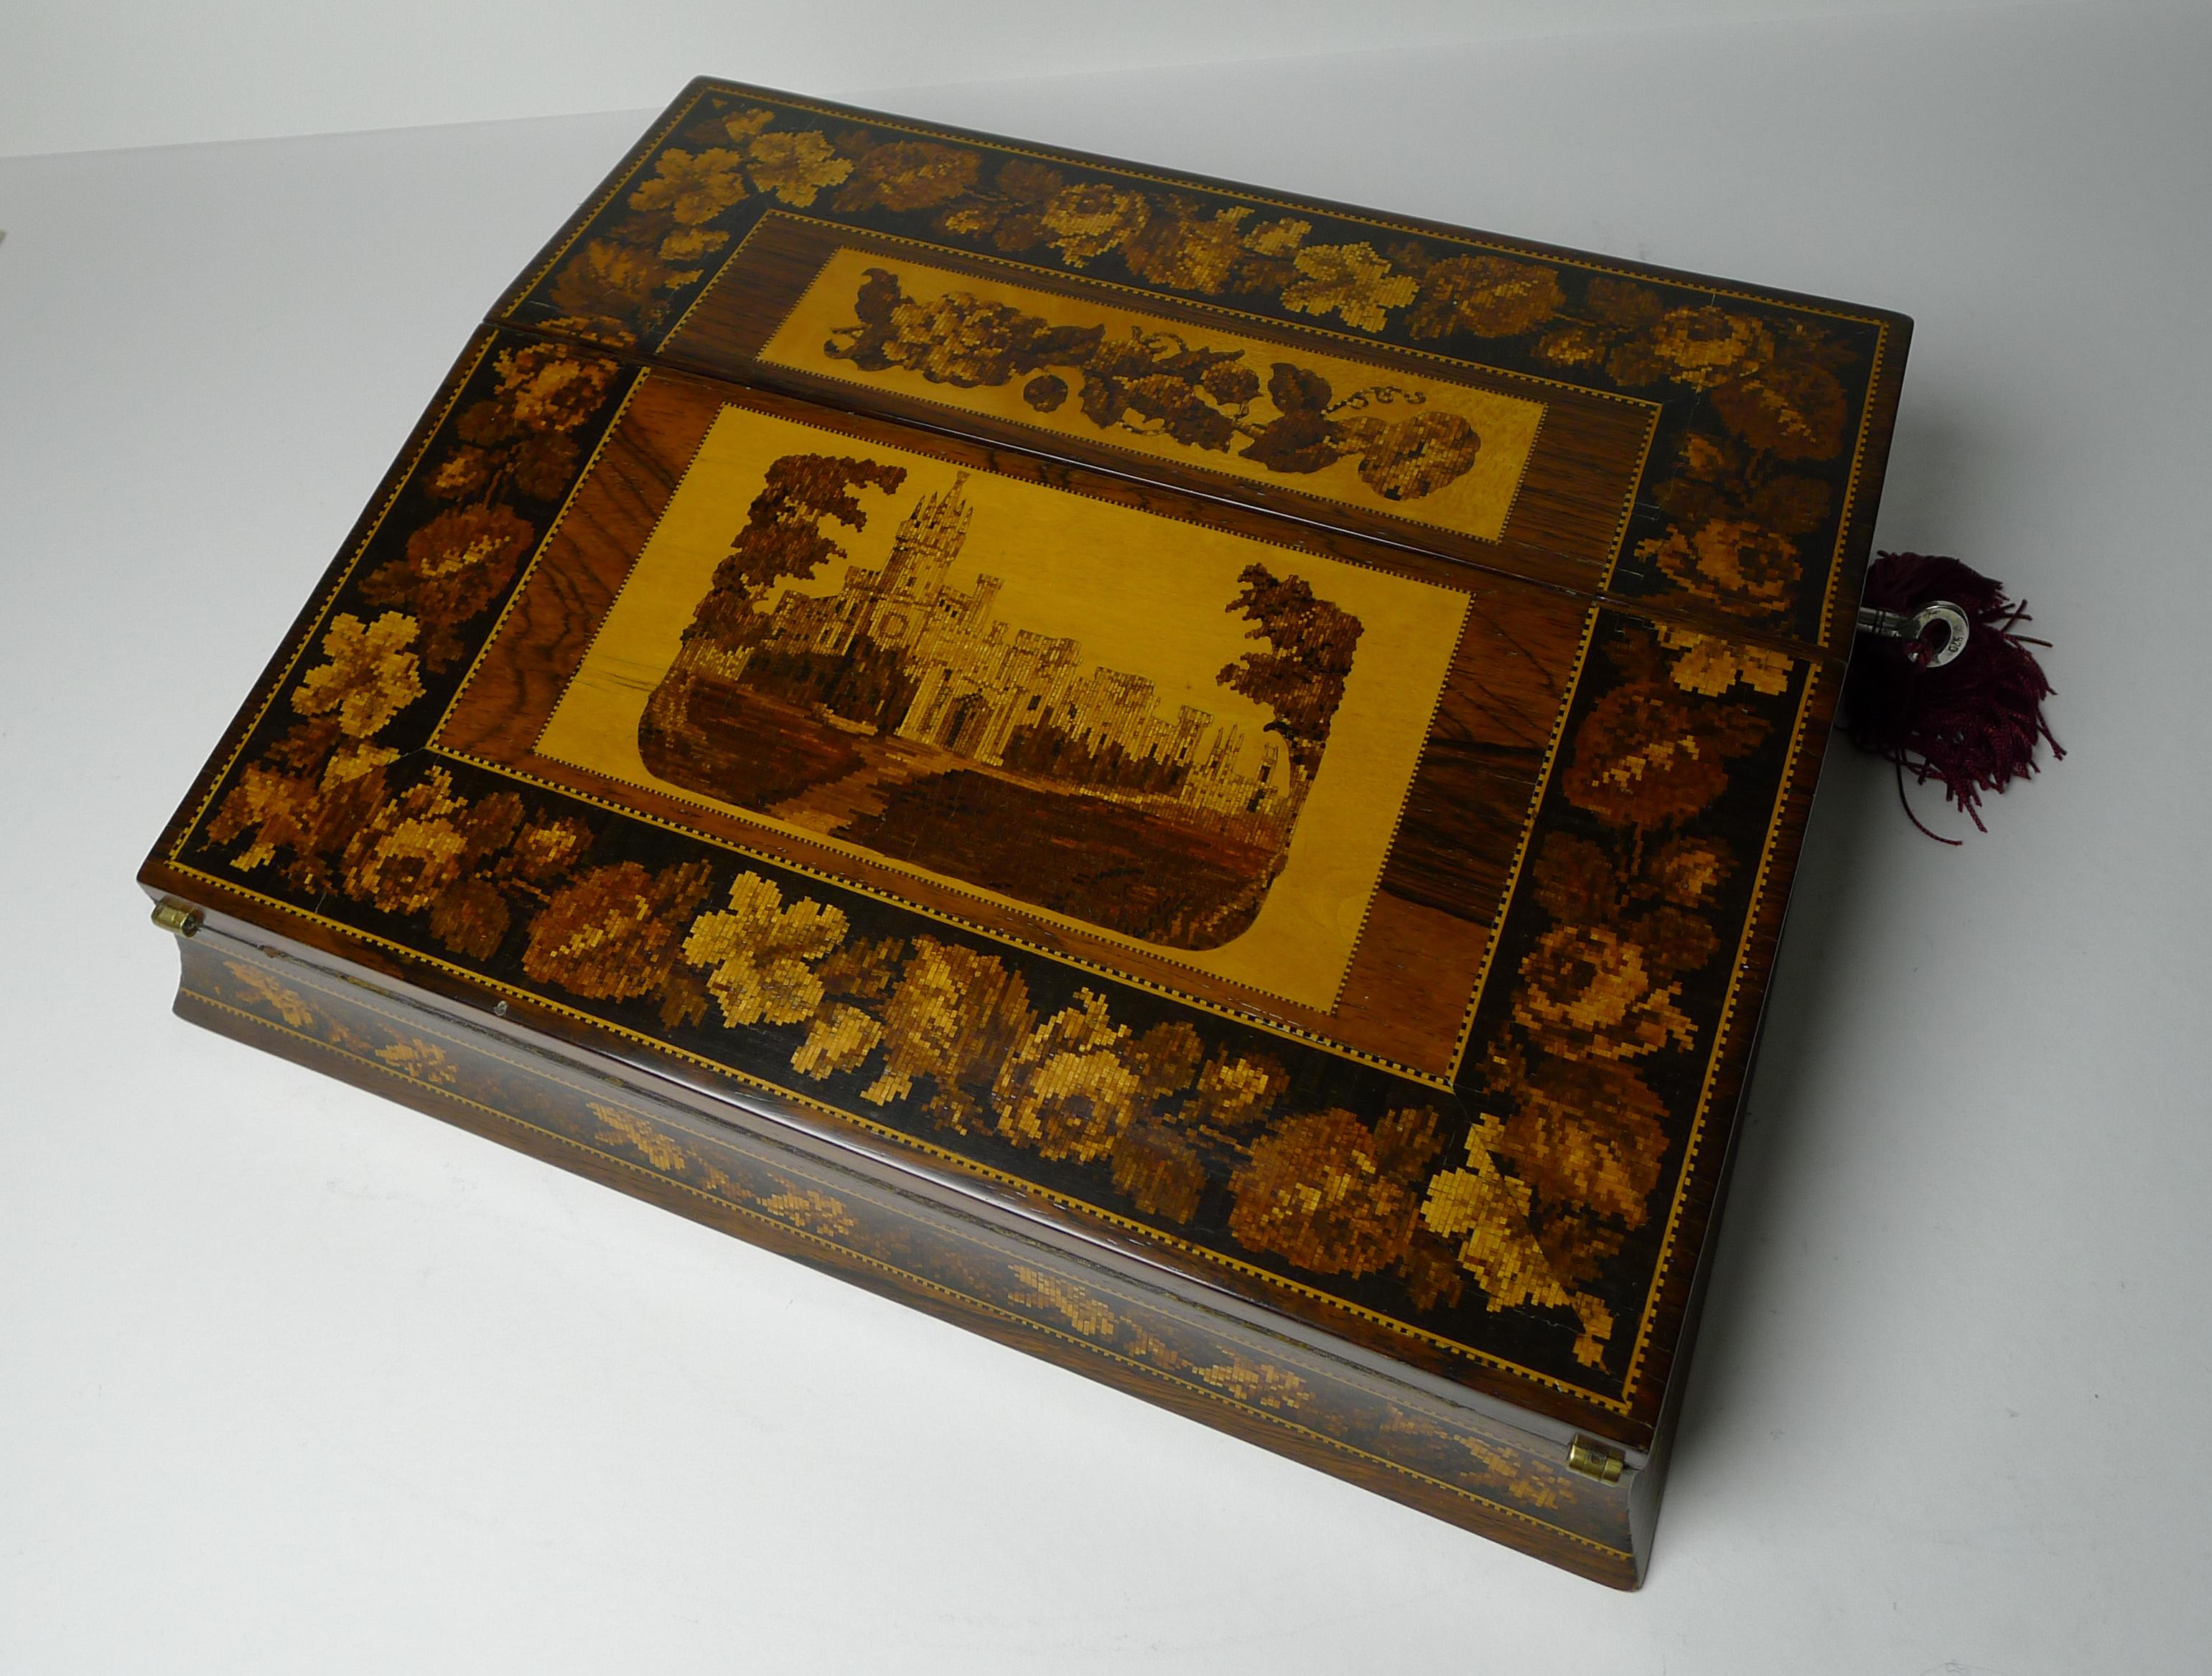 A truly fine example of a Victorian Tunbridge Ware writing box or lap desk dating to circa 1870.

The central section featuring Eridge Castle, East Sussex. The box comes complete with a working tasseled key, the lock in working order.

The top